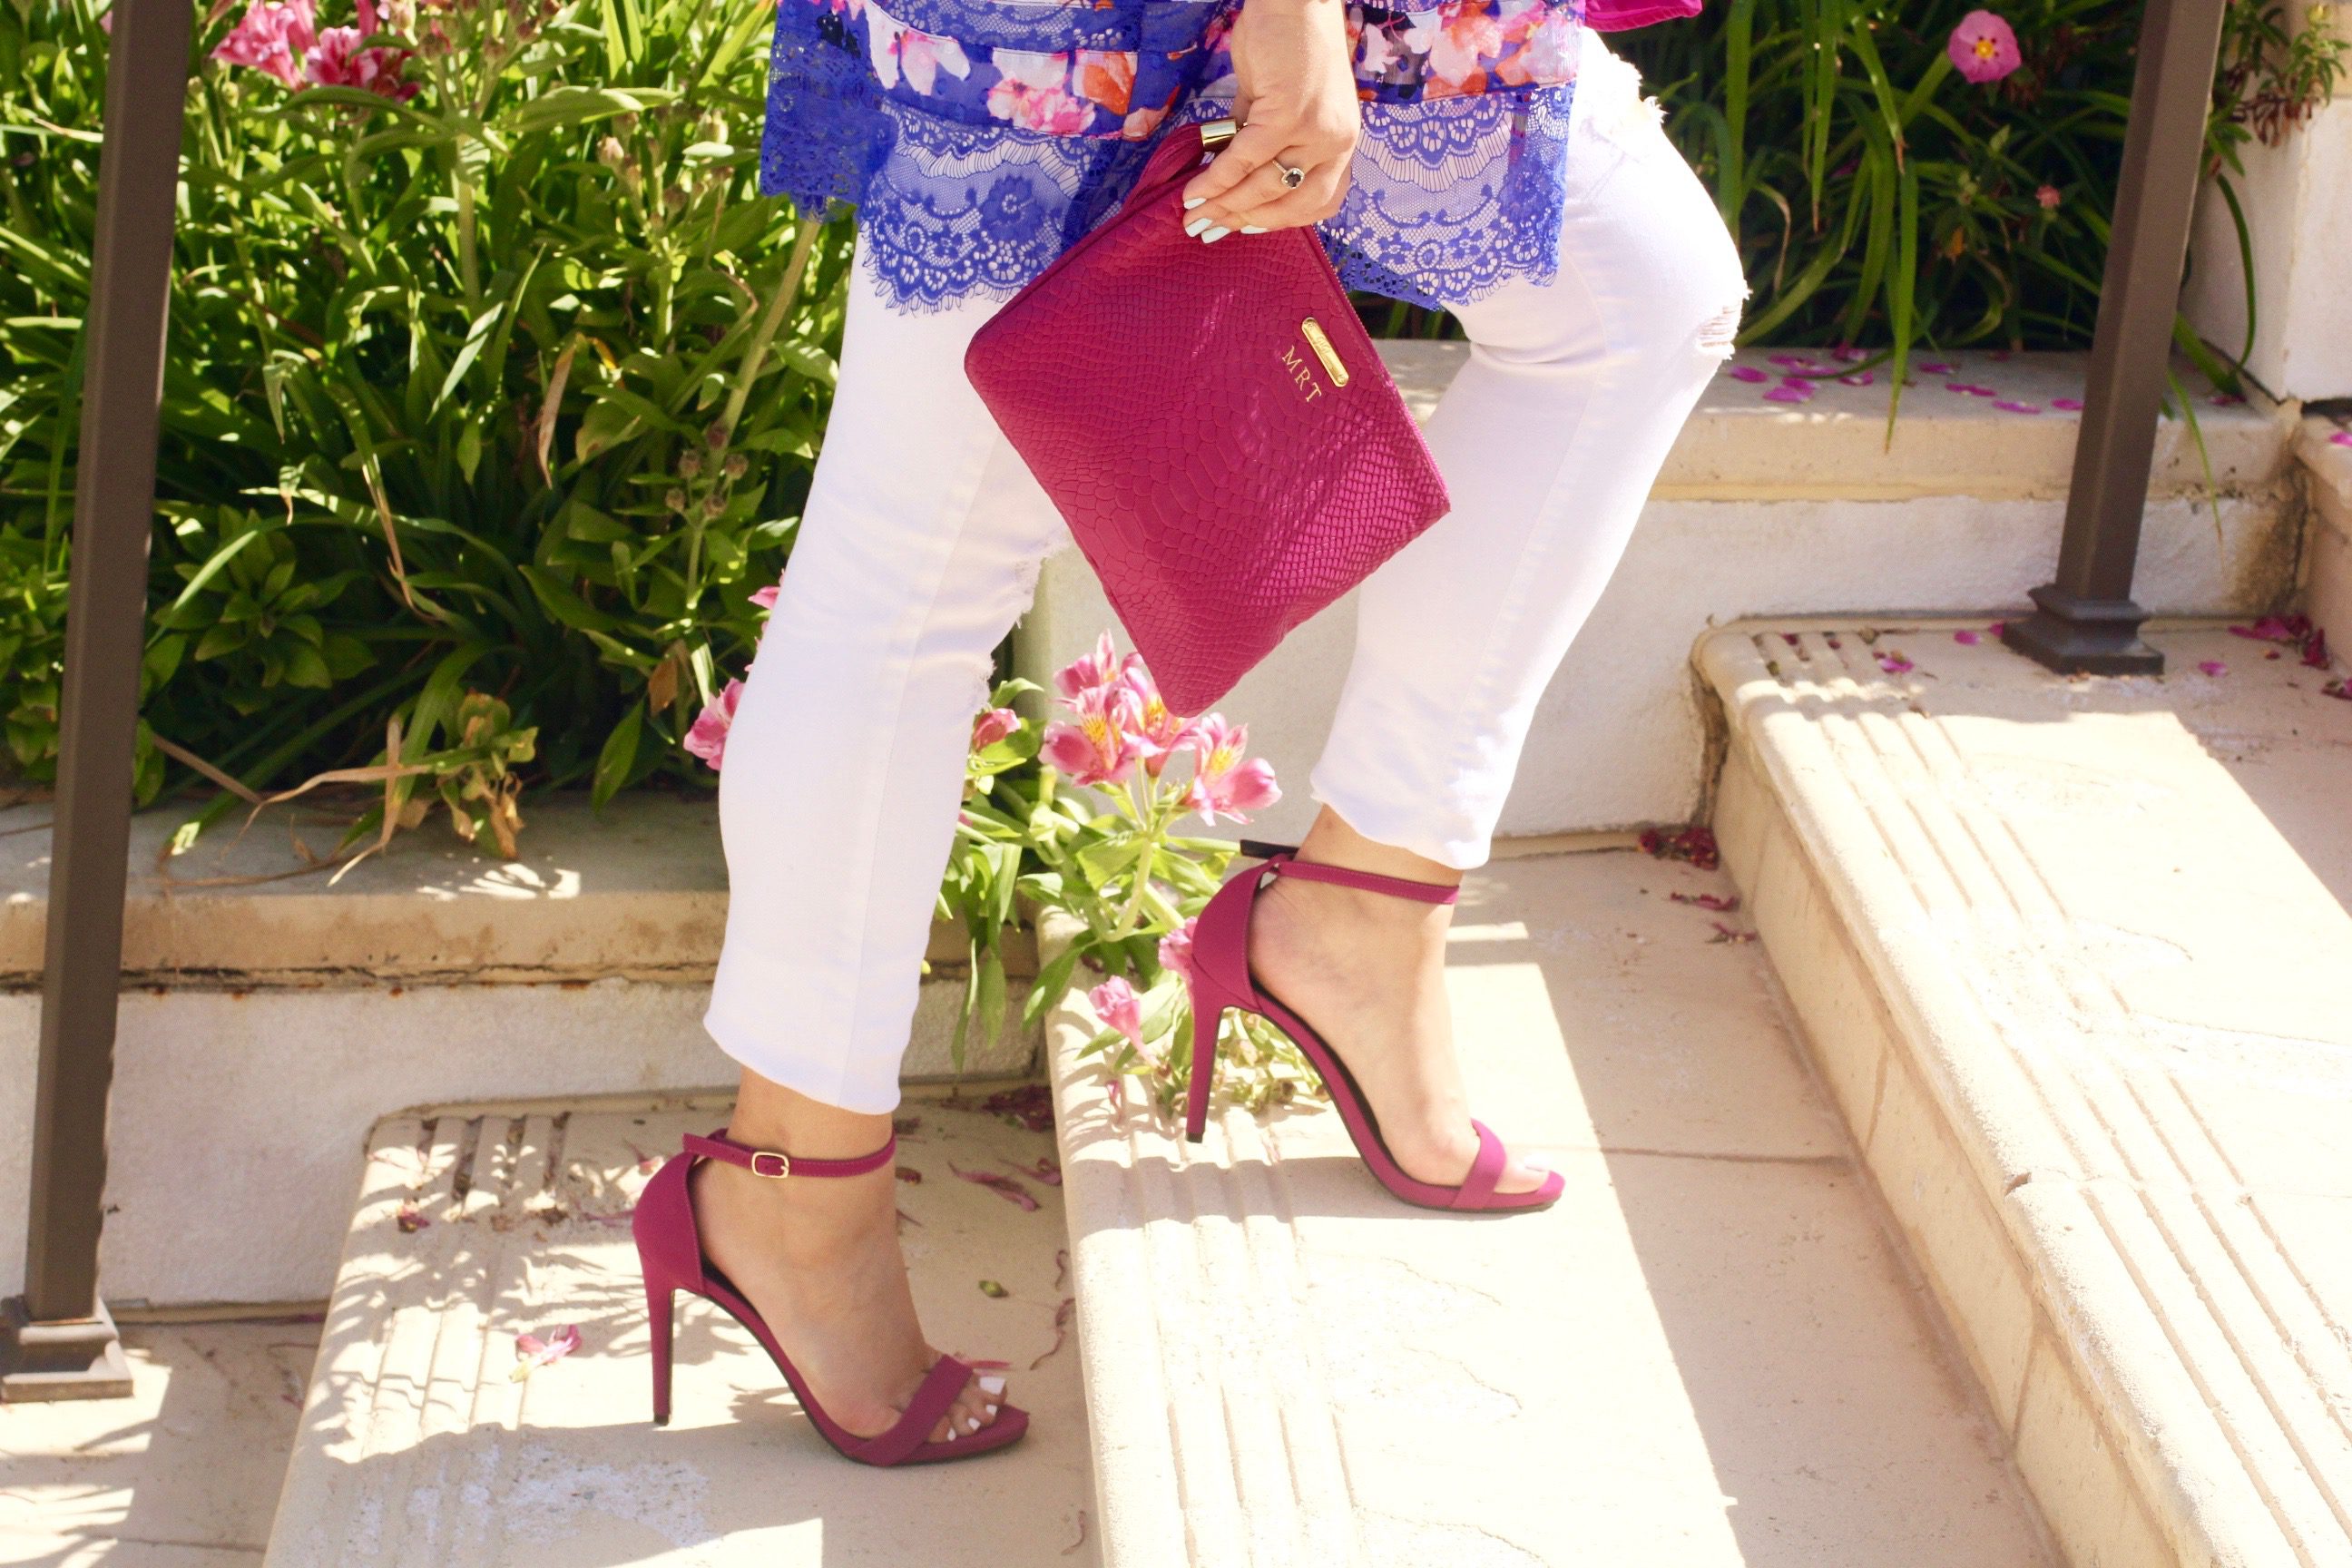 missyonmadison, melissa tierney, floral kimono, fuschia ankle strap heels, fuschia ankle strap sandals, fuschia heels, old navy, white skinny jeans, old navy white rockstar jeans, gigi ny clutch, gigi ny, gigi ny magenta clutch, kendra scott, kendra scott rayne necklace, mirrored aviators, pink mirrored aviators, pink chiffon camisole, apt 9 camisole, fashion blogger, style blogger, spring style,